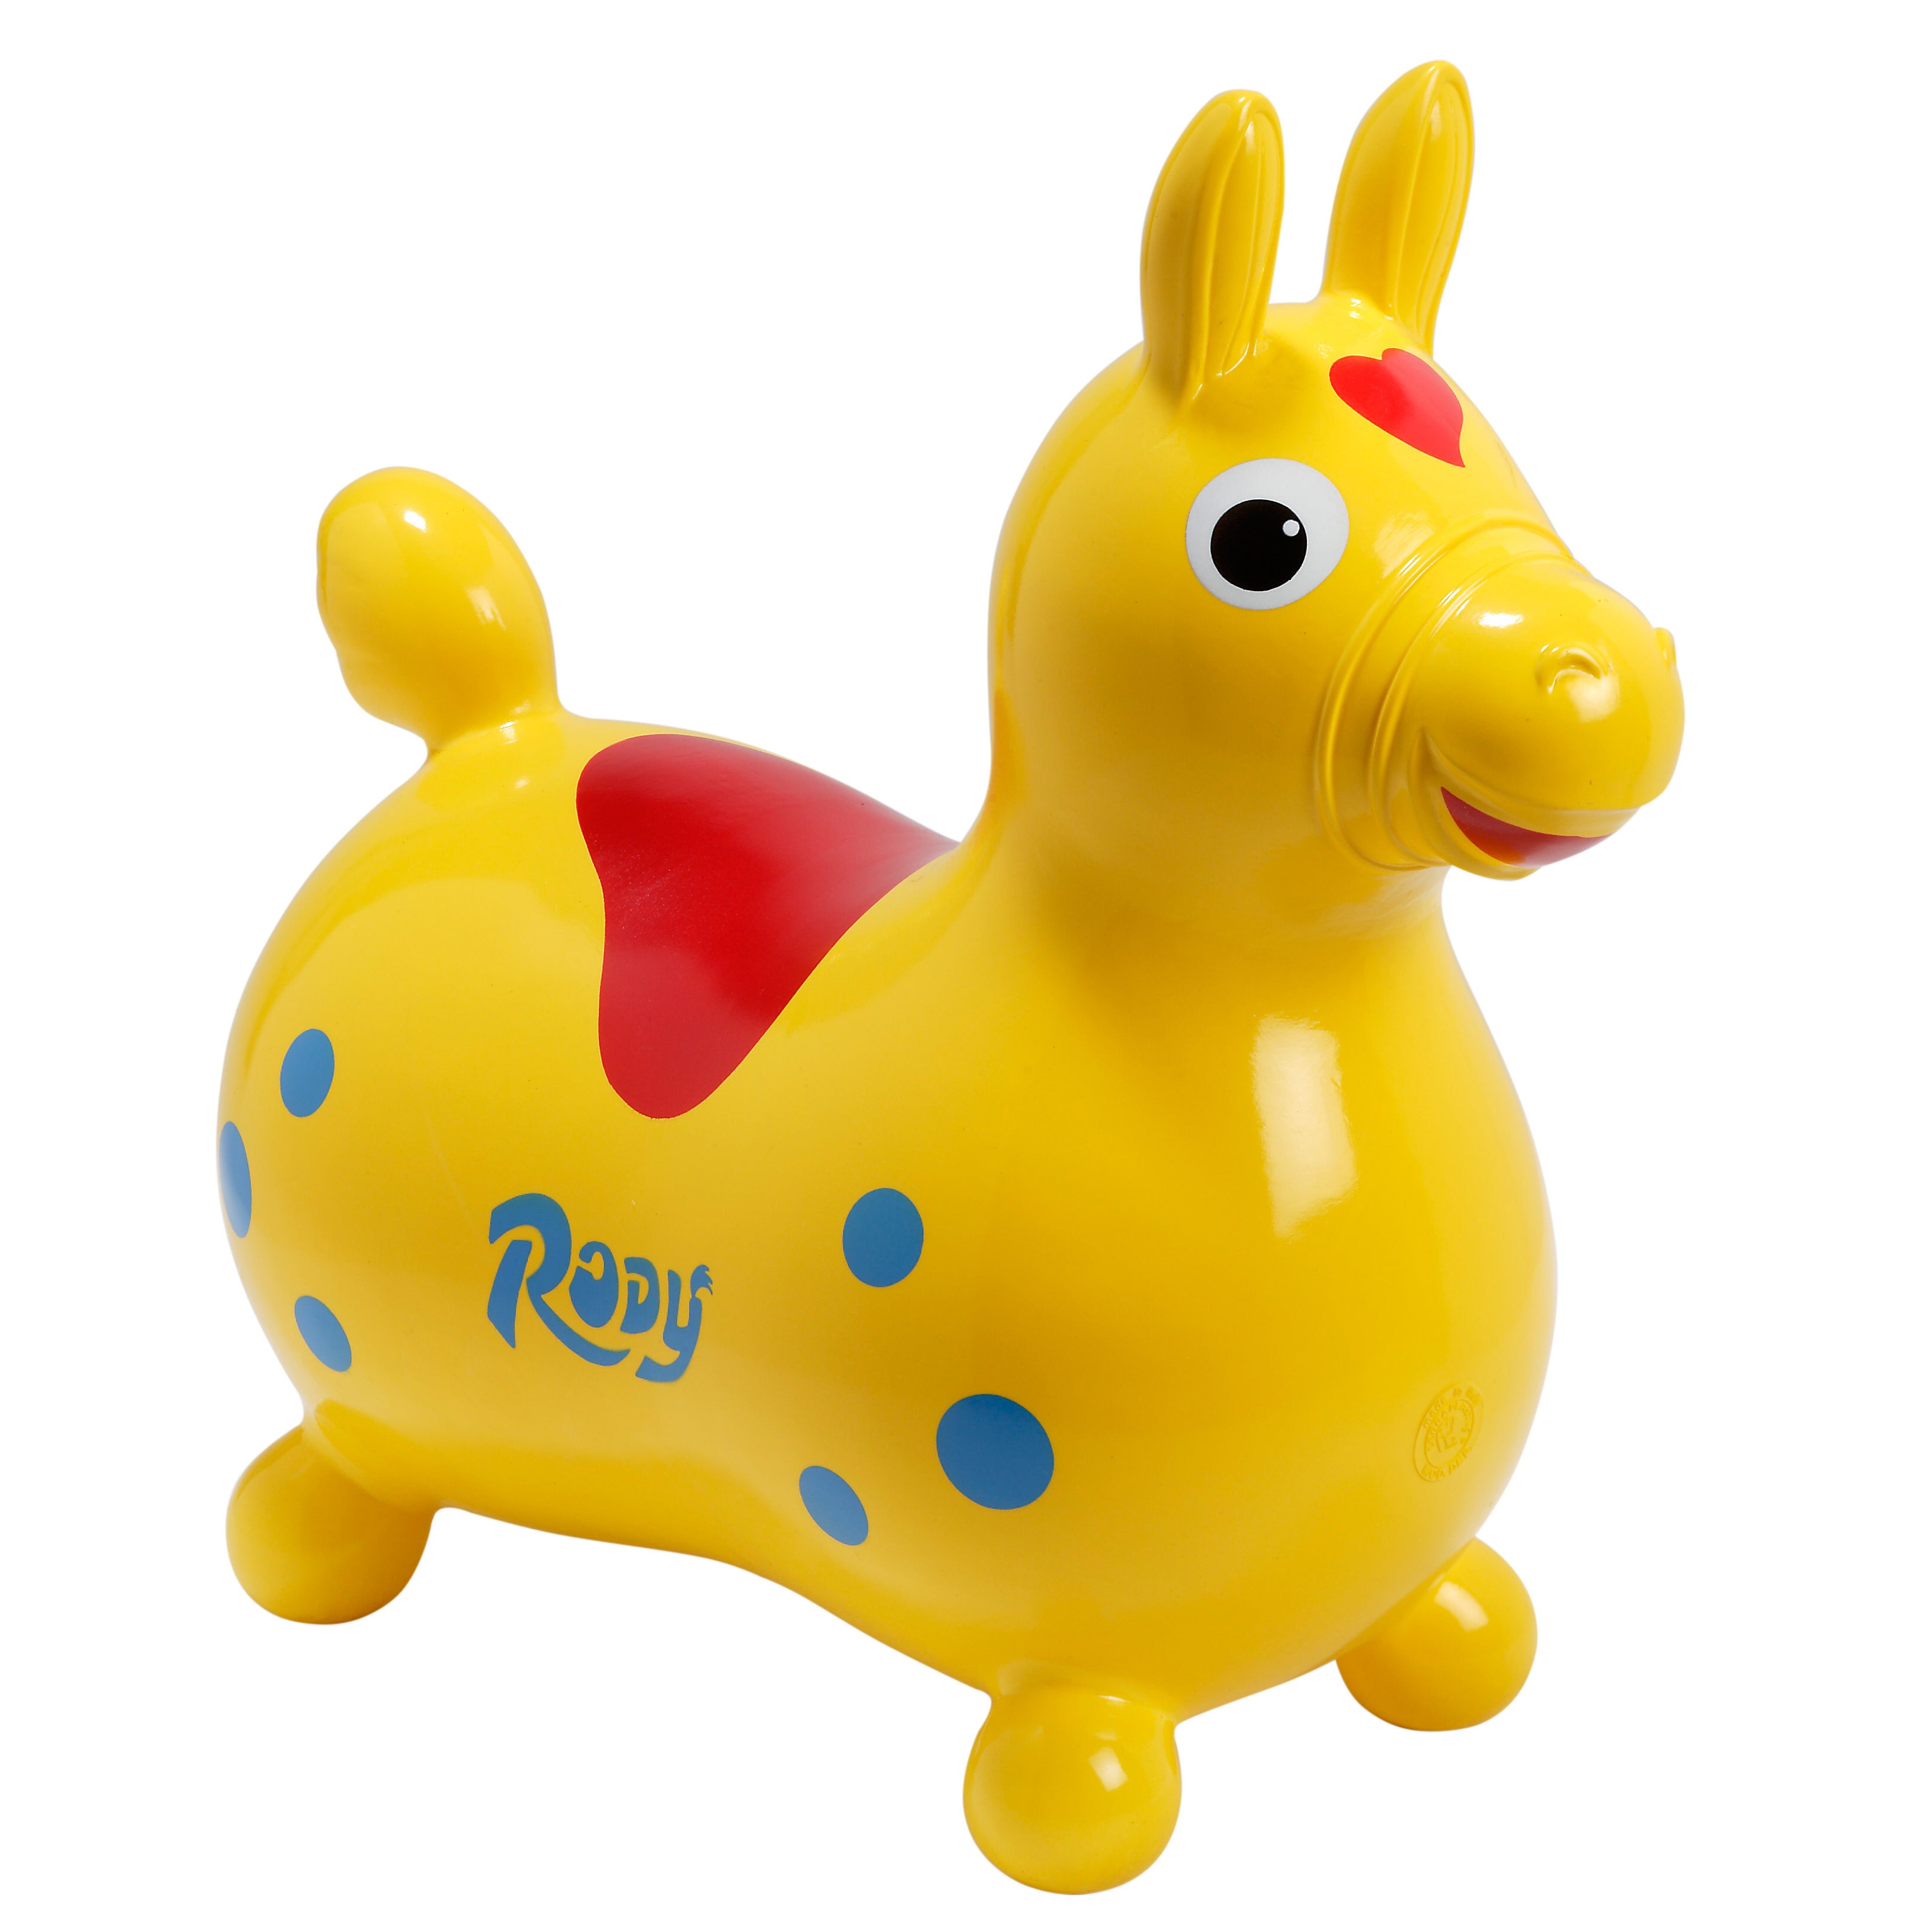 The Rody Inflatable Bounce Horse promotes active playtime while developing children’s balance, motor skills and body coordination. The Rody Horse has been adopted in many nursery schools as a psycho-motor tool, and also used by therapists to enhance language, memory, and perception skills. However, it's mainly a fun and relaxing toy to get your child active.